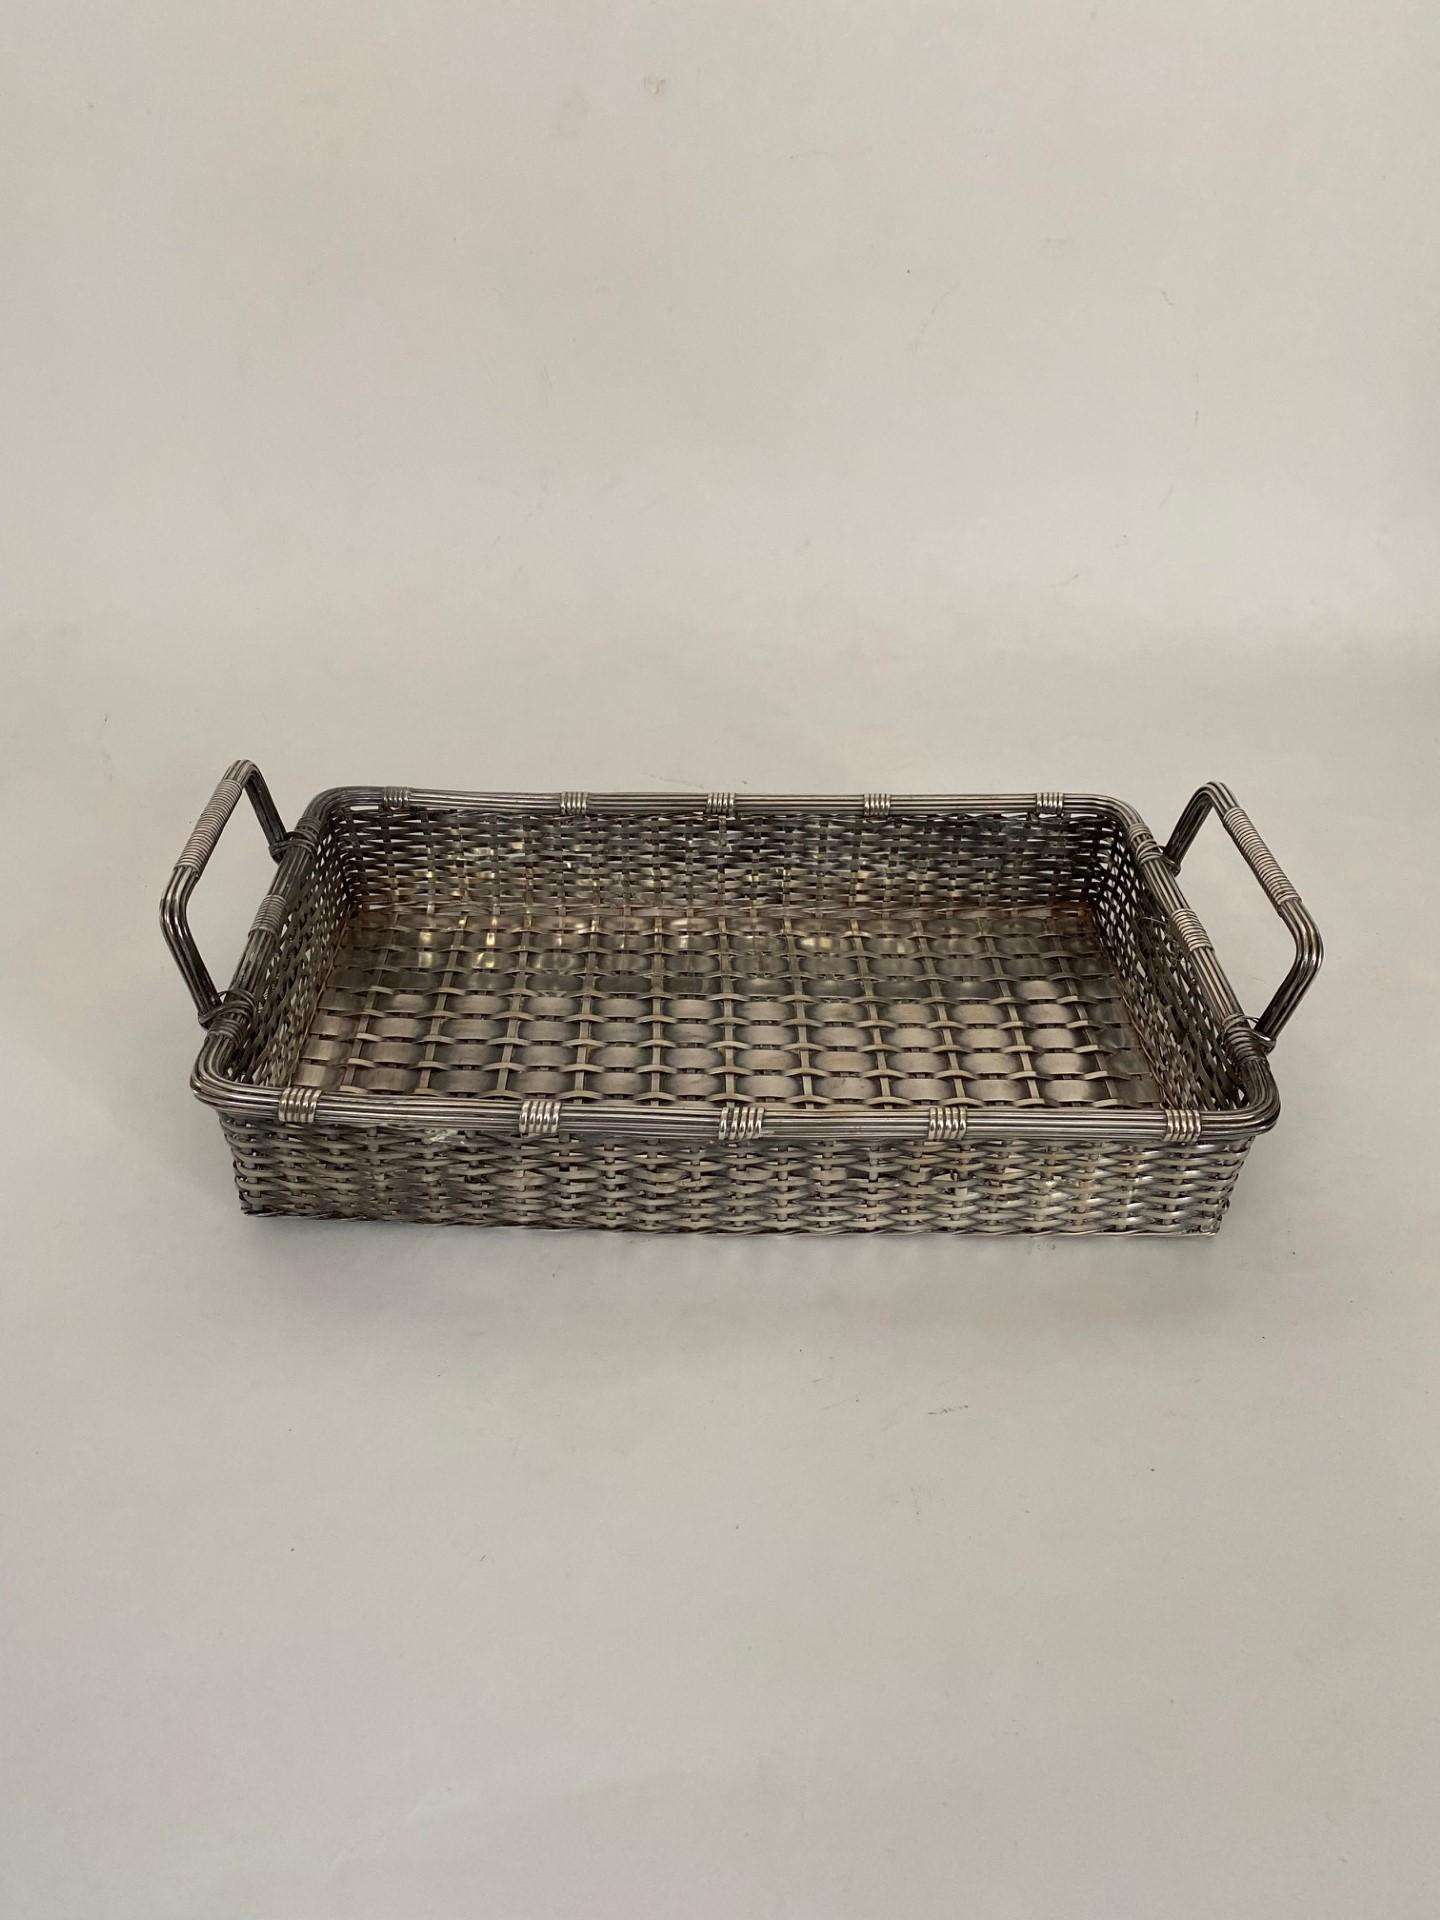 A  rare English made antique Victorian silver plate woven basket with two handles is a delightful and intricate piece that reflects the ornate design sensibilities of the Victorian era. This charming basket is crafted from silver-plated material,